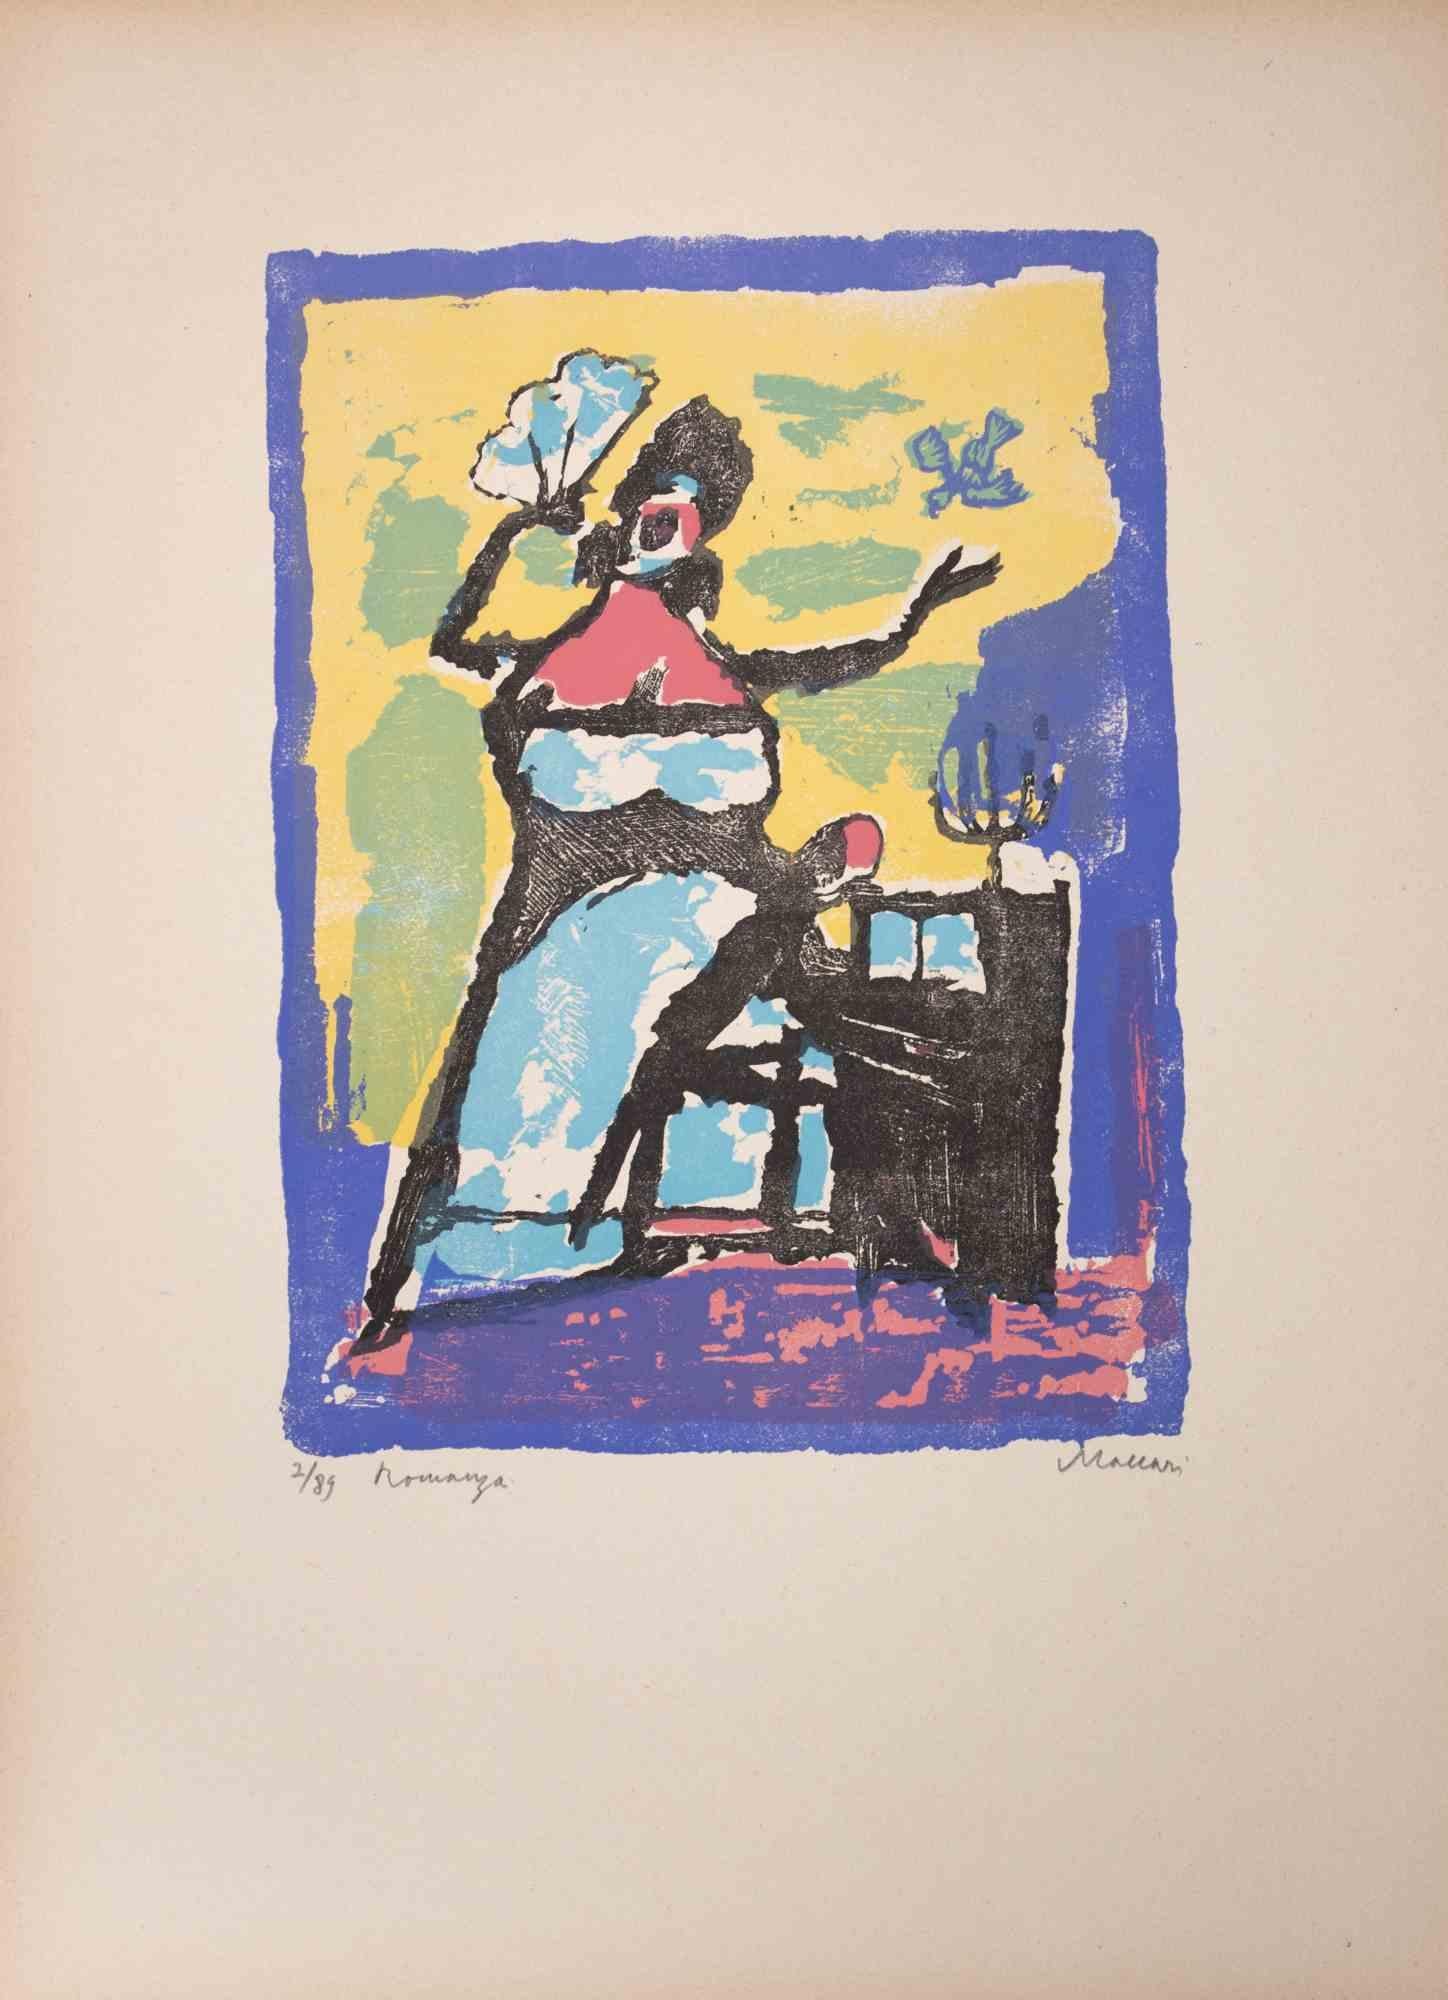 Romance is an Artwork realized by Mino Maccari  (1924-1989) in Mid 20th Century.

Colored woodcut on paper. Hand-signed on the lower, numbered 2/89 specimens and titled on the left margin.

Good conditions.

Mino Maccari (Siena, 1924-Rome, June 16,